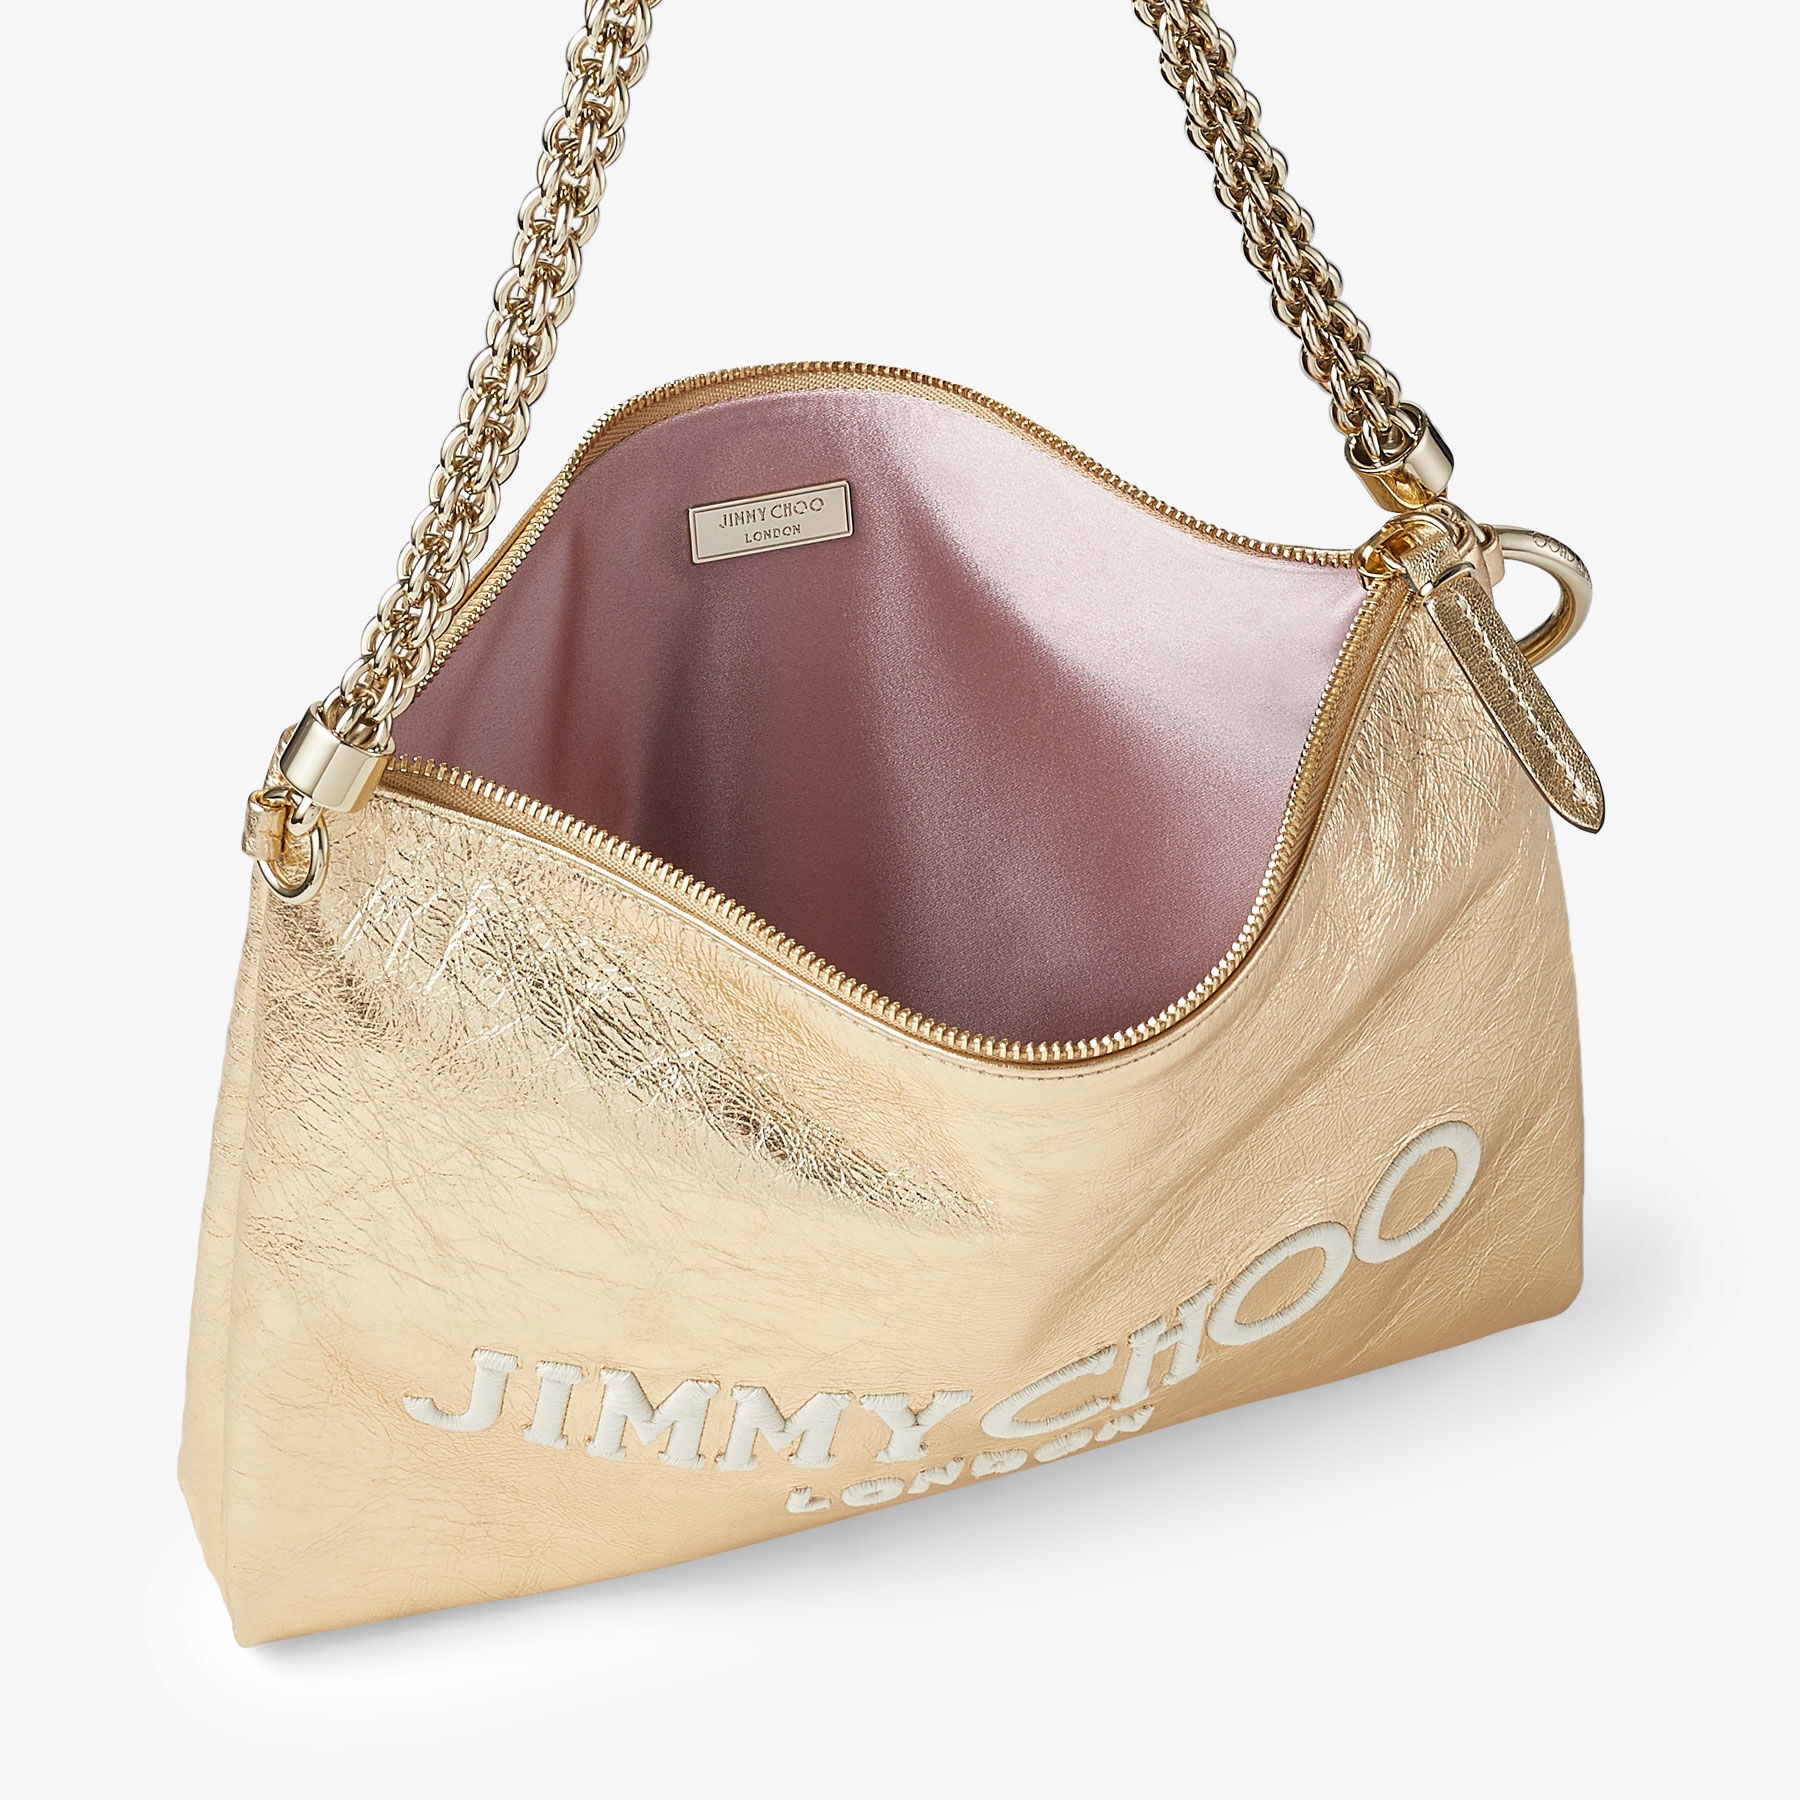 Callie Shoulder
Gold Metallic Nappa Shoulder Bag with Jimmy Choo Embroidery - 4